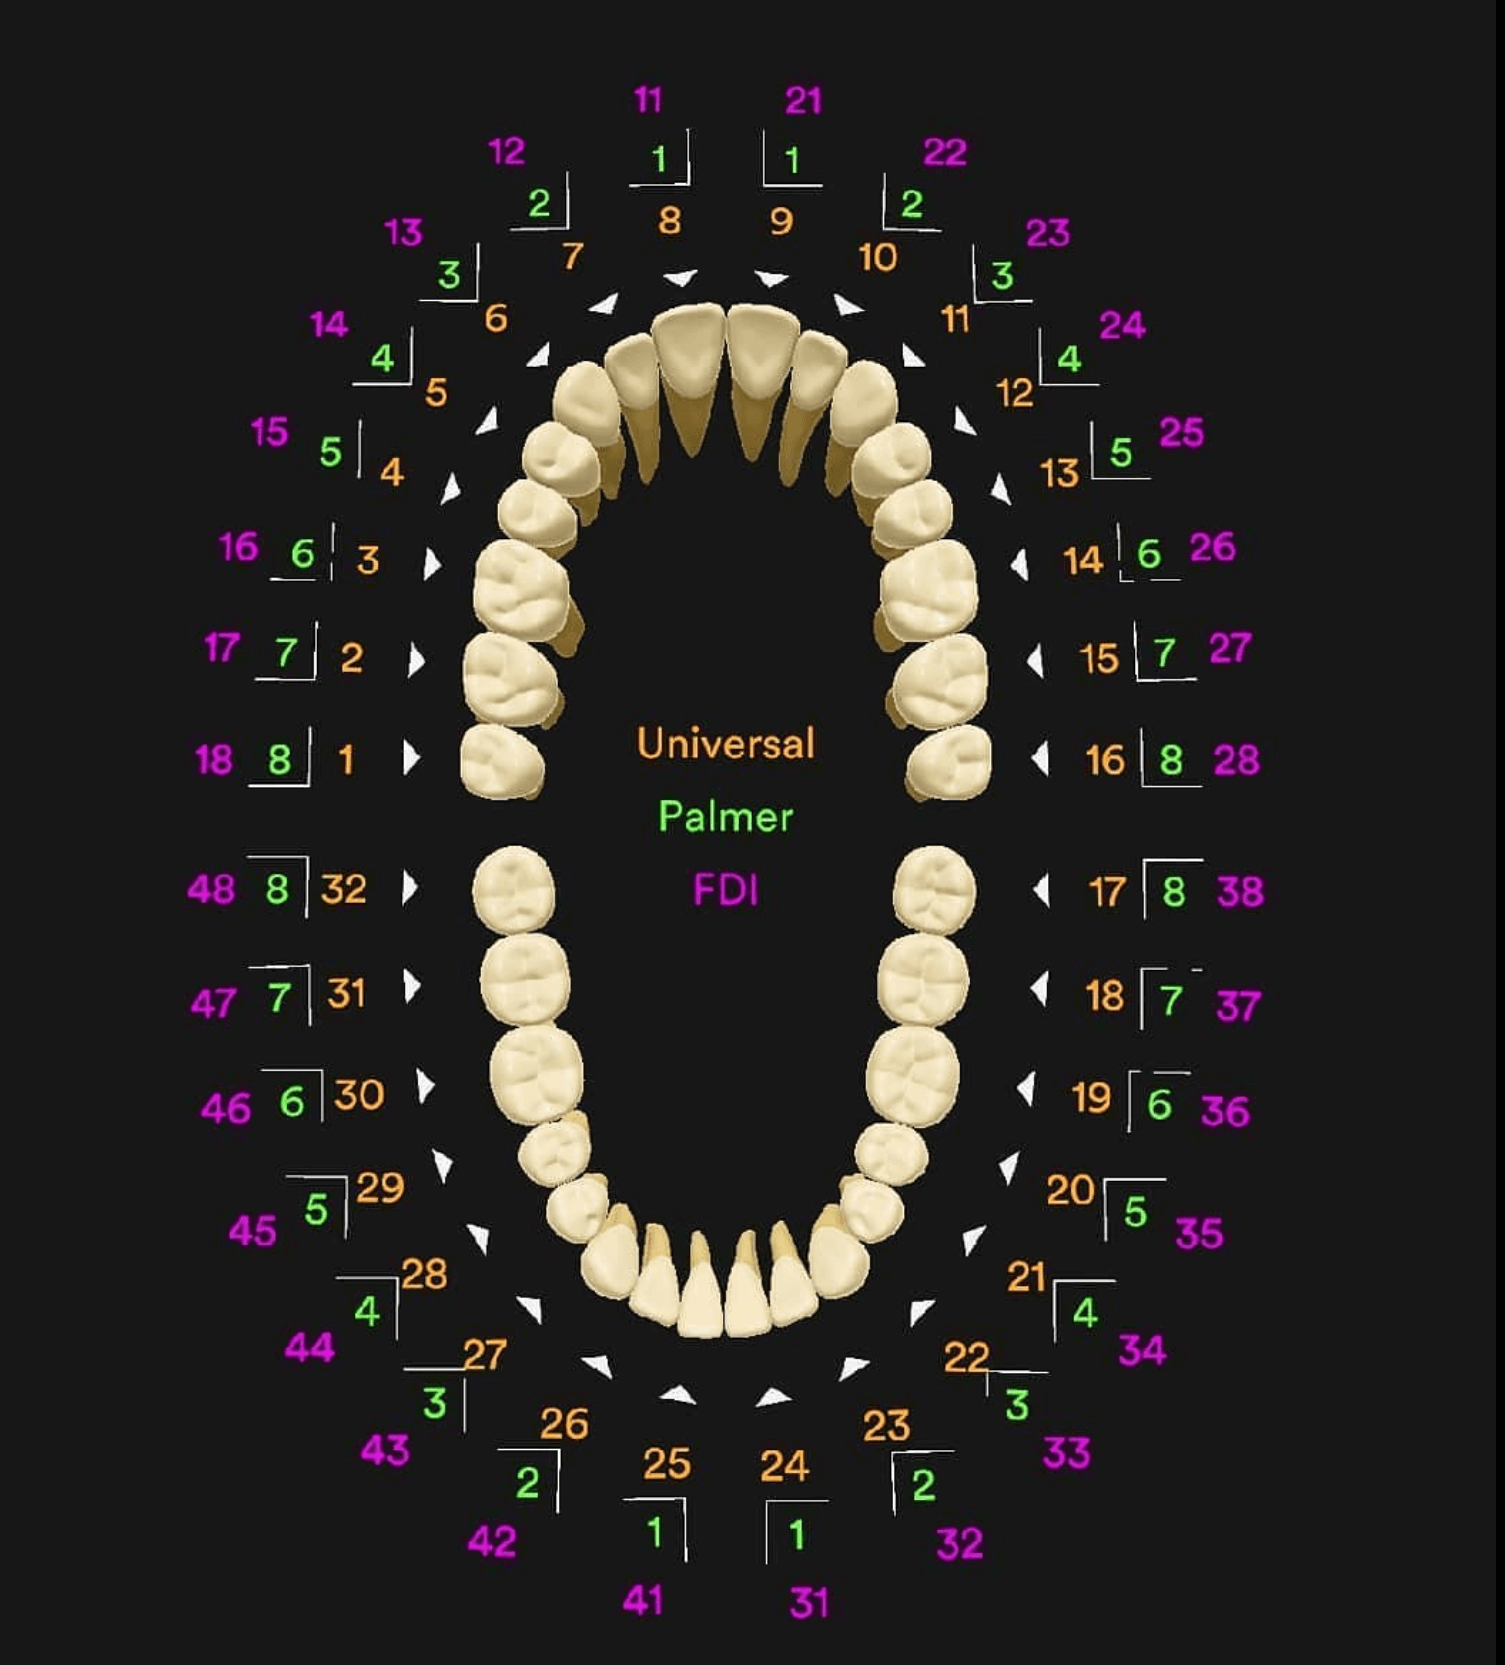 How To Chart Teeth In Dentistry